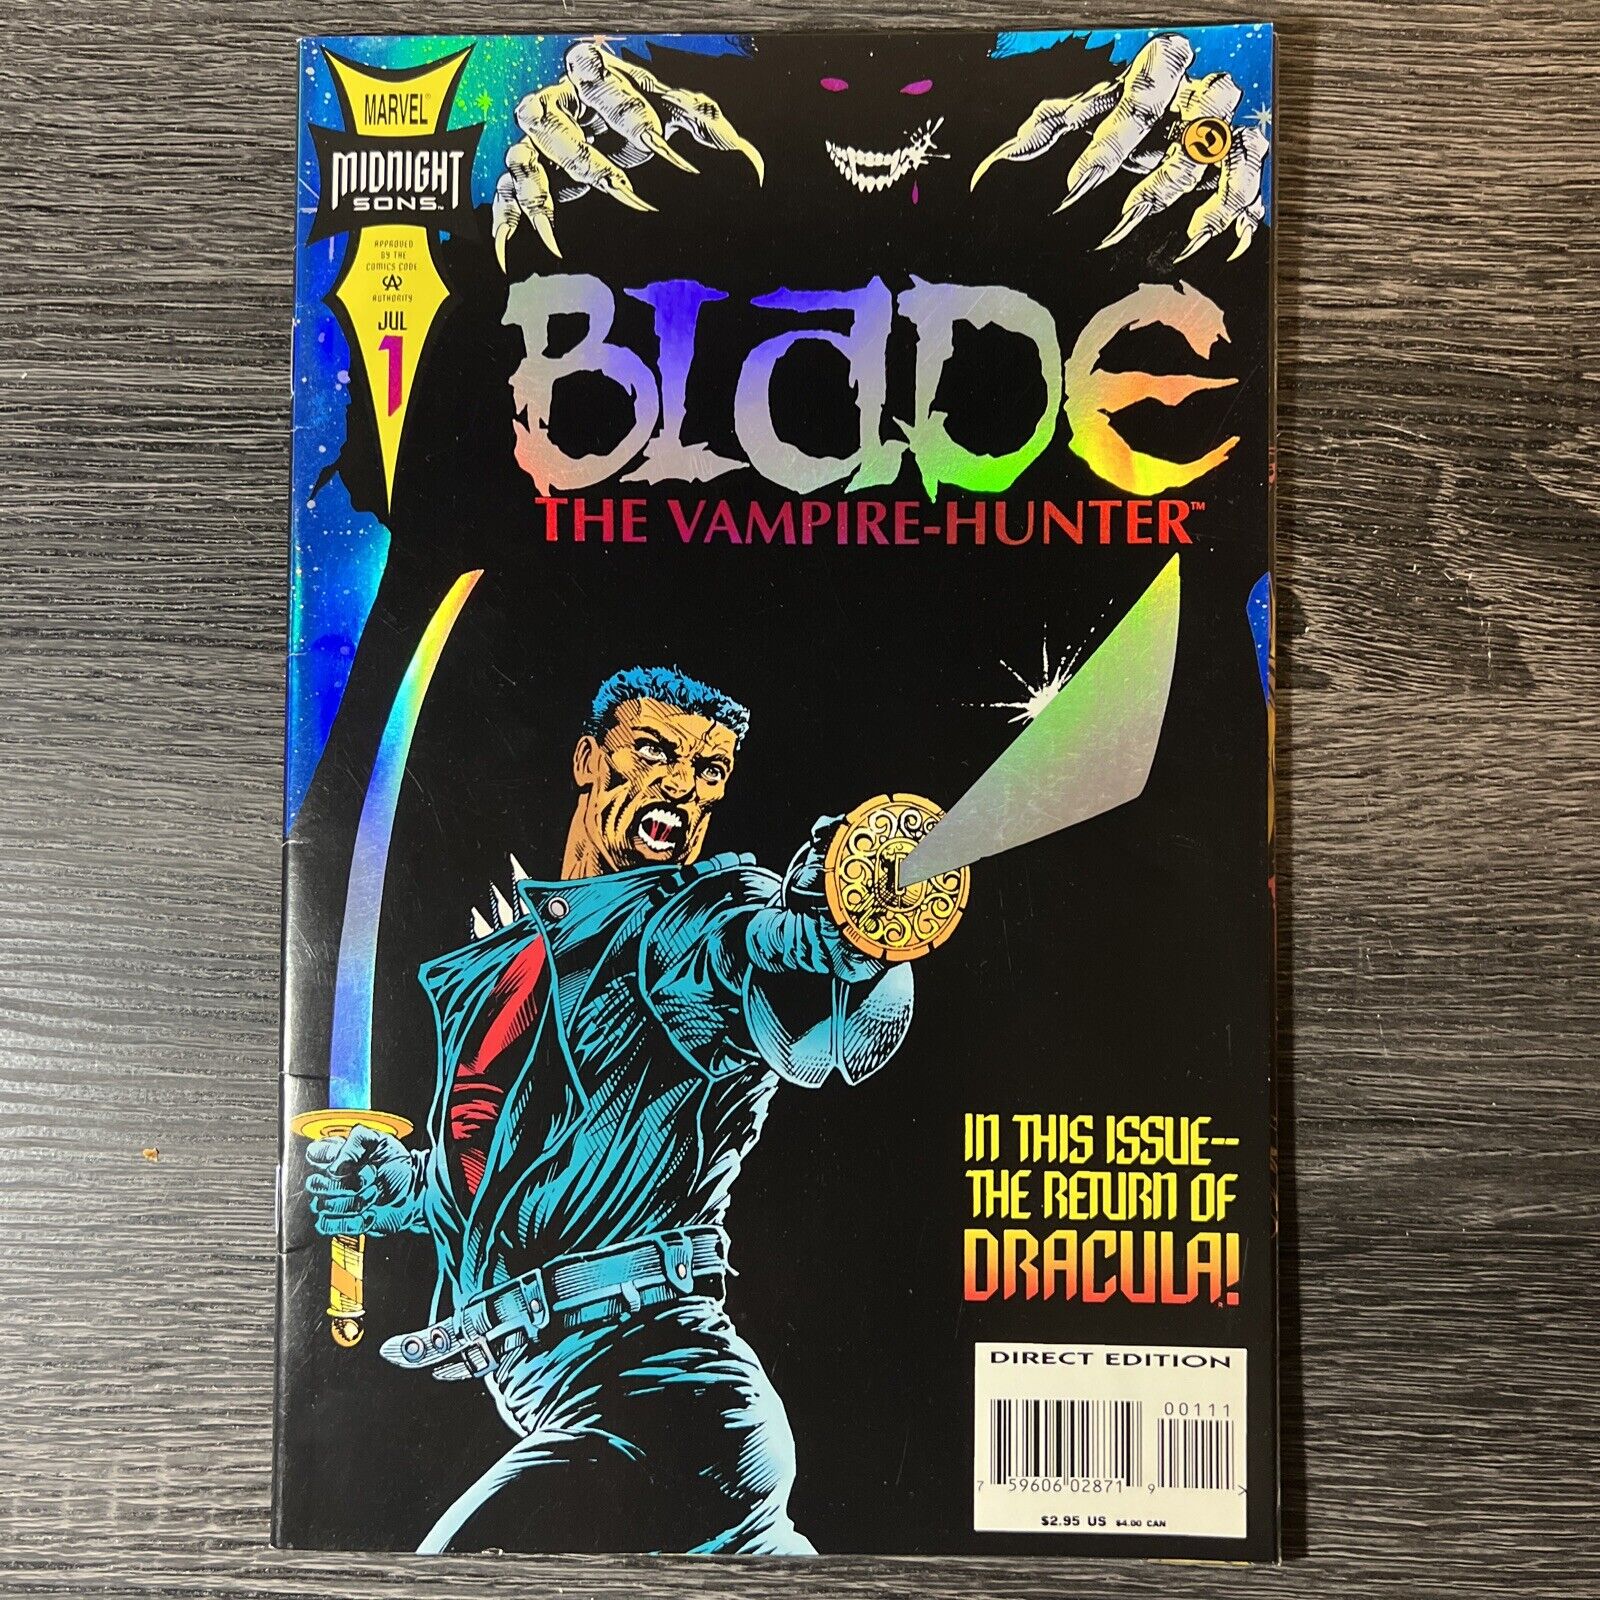 BLADE THE VAMPIRE HUNTER #1 Midnight Sons Holochrome Cover 1994 NM CONDITION